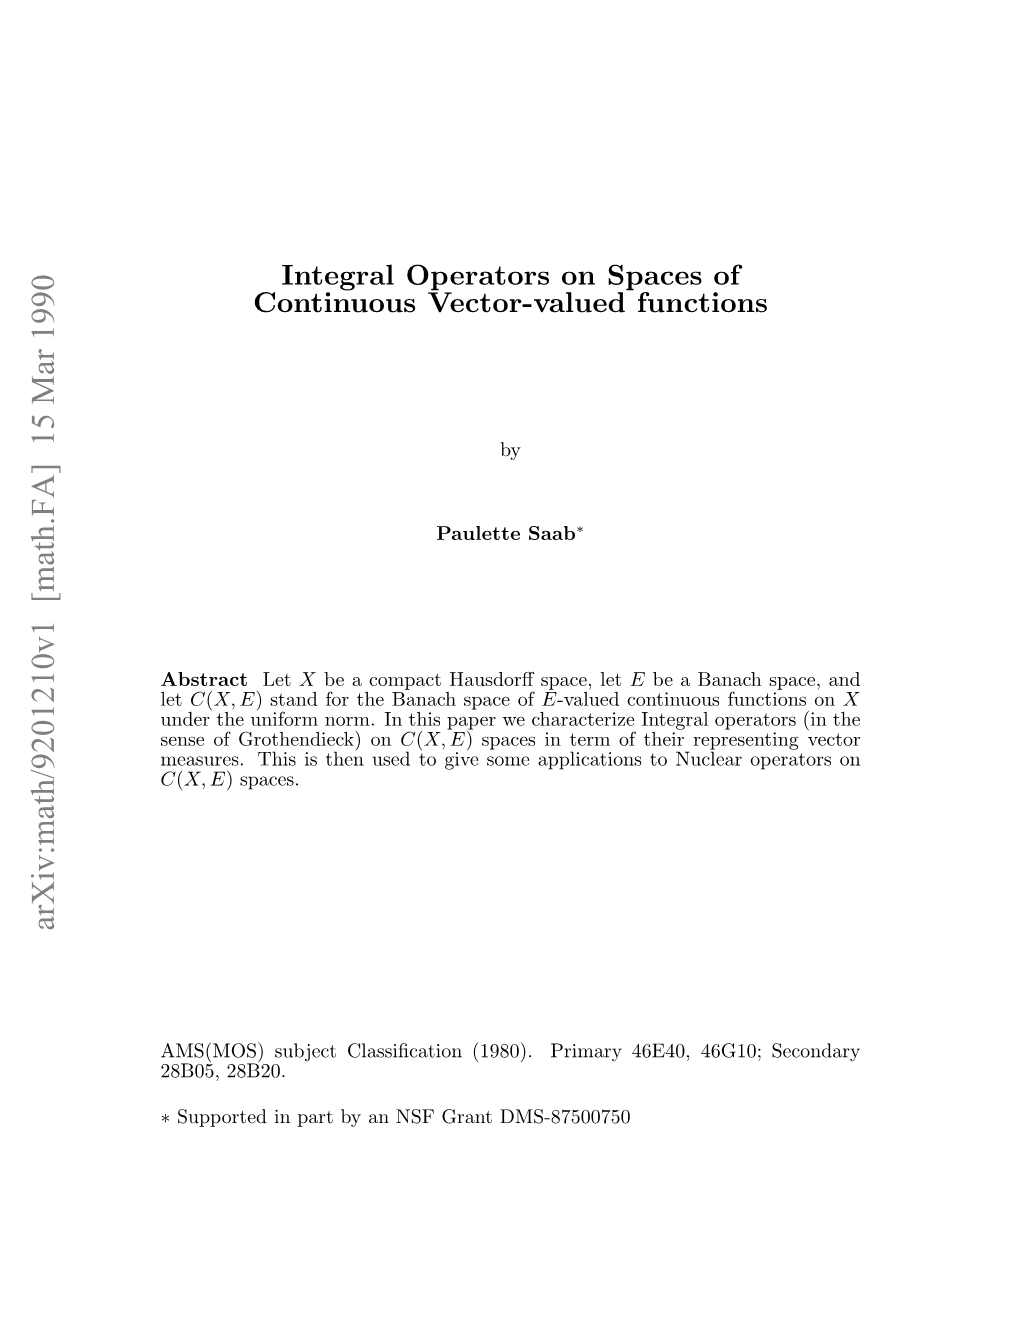 Integral Operators on Spaces of Continuous Vector-Valued Functions